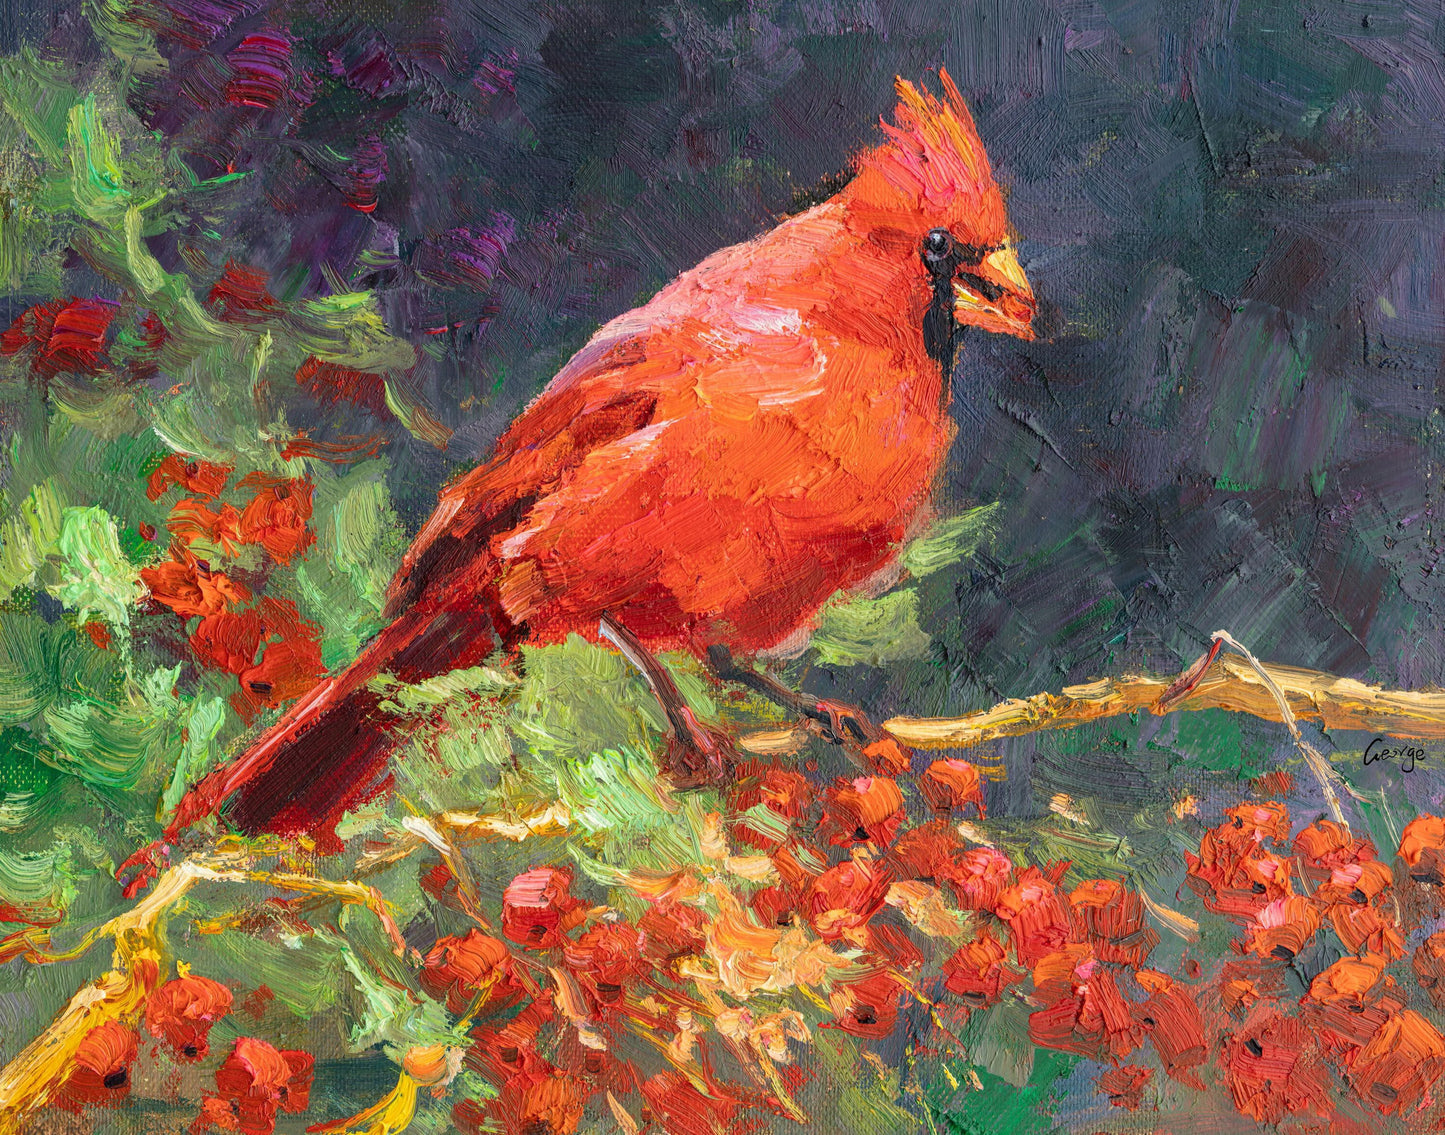 Northern Cardinal Male Oil Painting, Abstract Wall Art, Original Painting, Abstract Painting, Large Abstract Painting, Canvas Painting